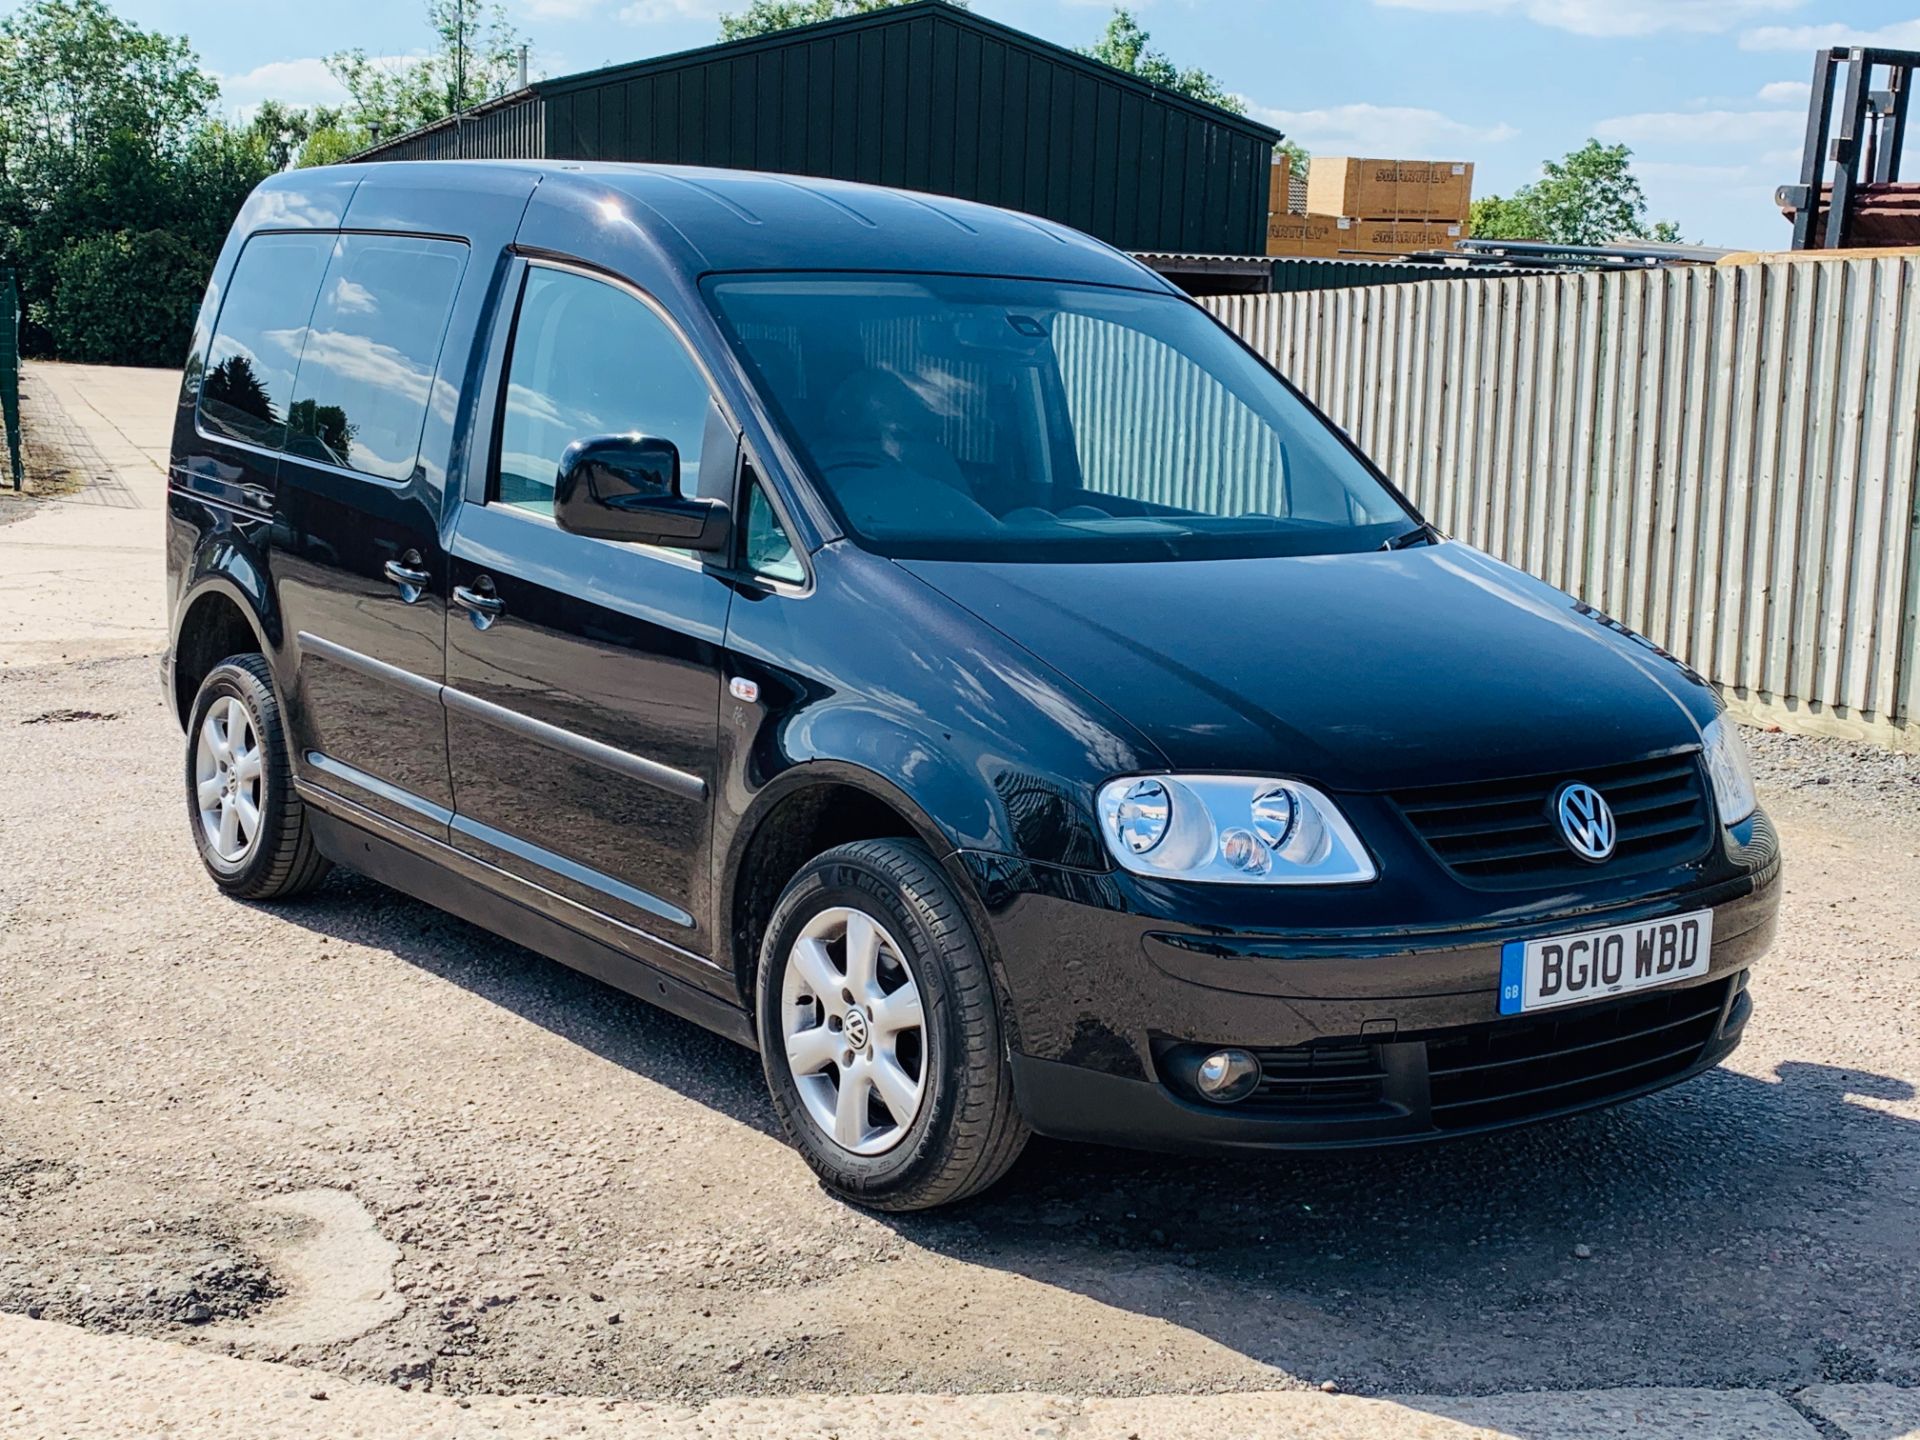 VOLKSWAGEN CADDY 1.9TDI "LIFE" DSG AUTO - WHEELCHAIR / DISABLED DRIVER VEHICLE -1 KEEPER - 42K MILES - Image 17 of 20